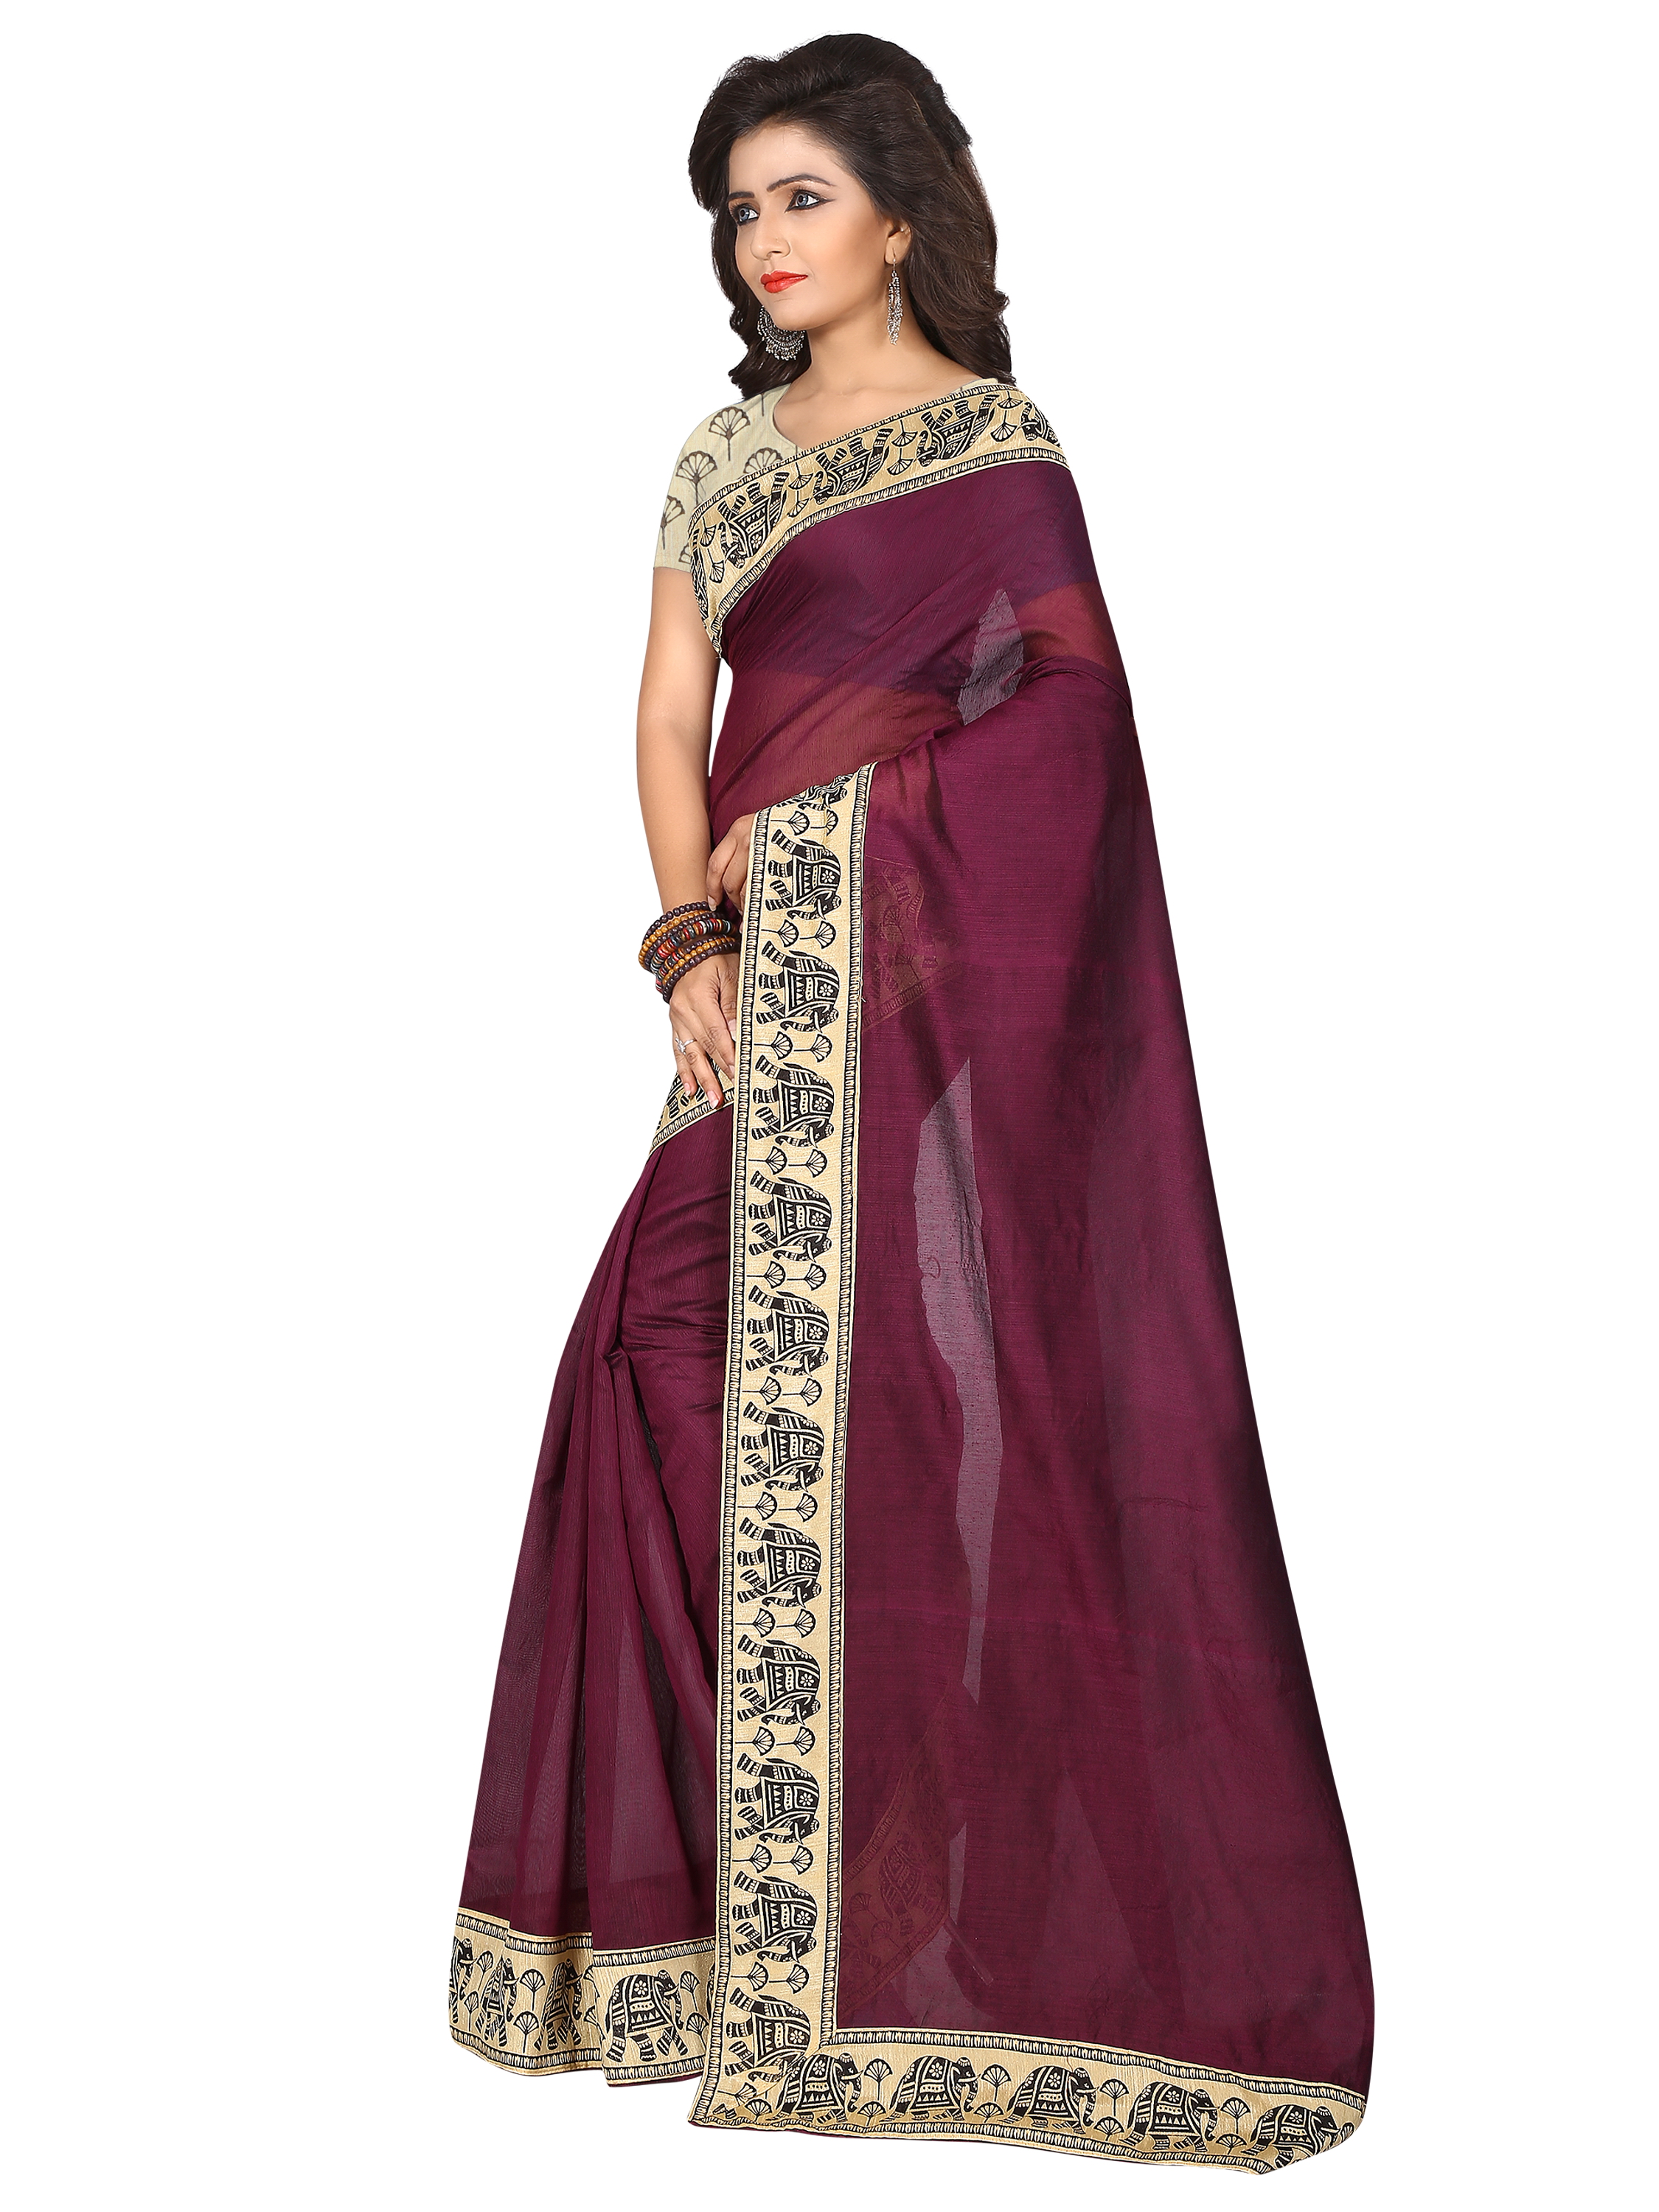 traditional south indian chanderi cotton saree